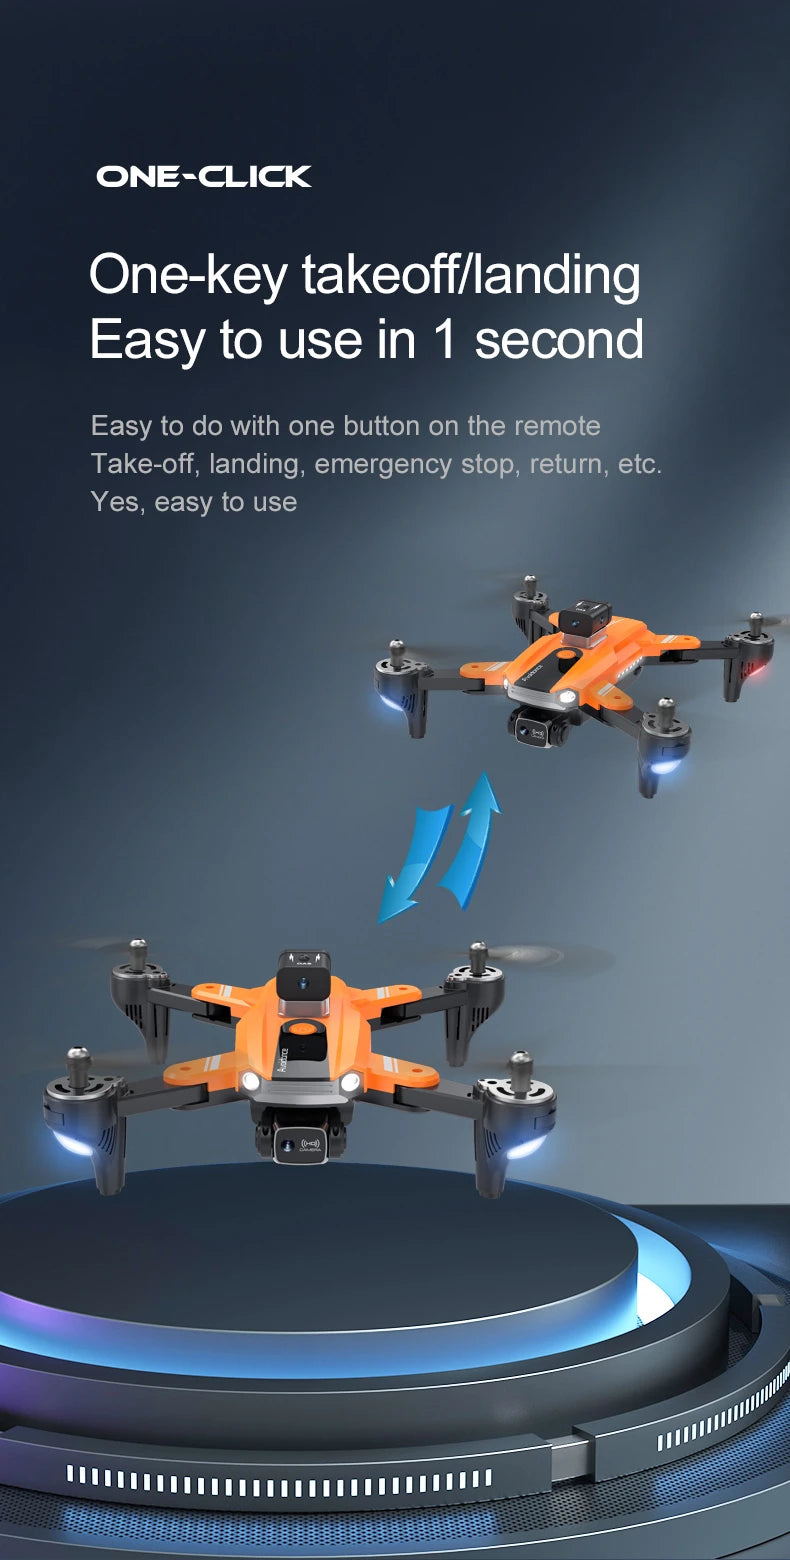 S8 Drone, one-click one-key takeoff easy to do with one button